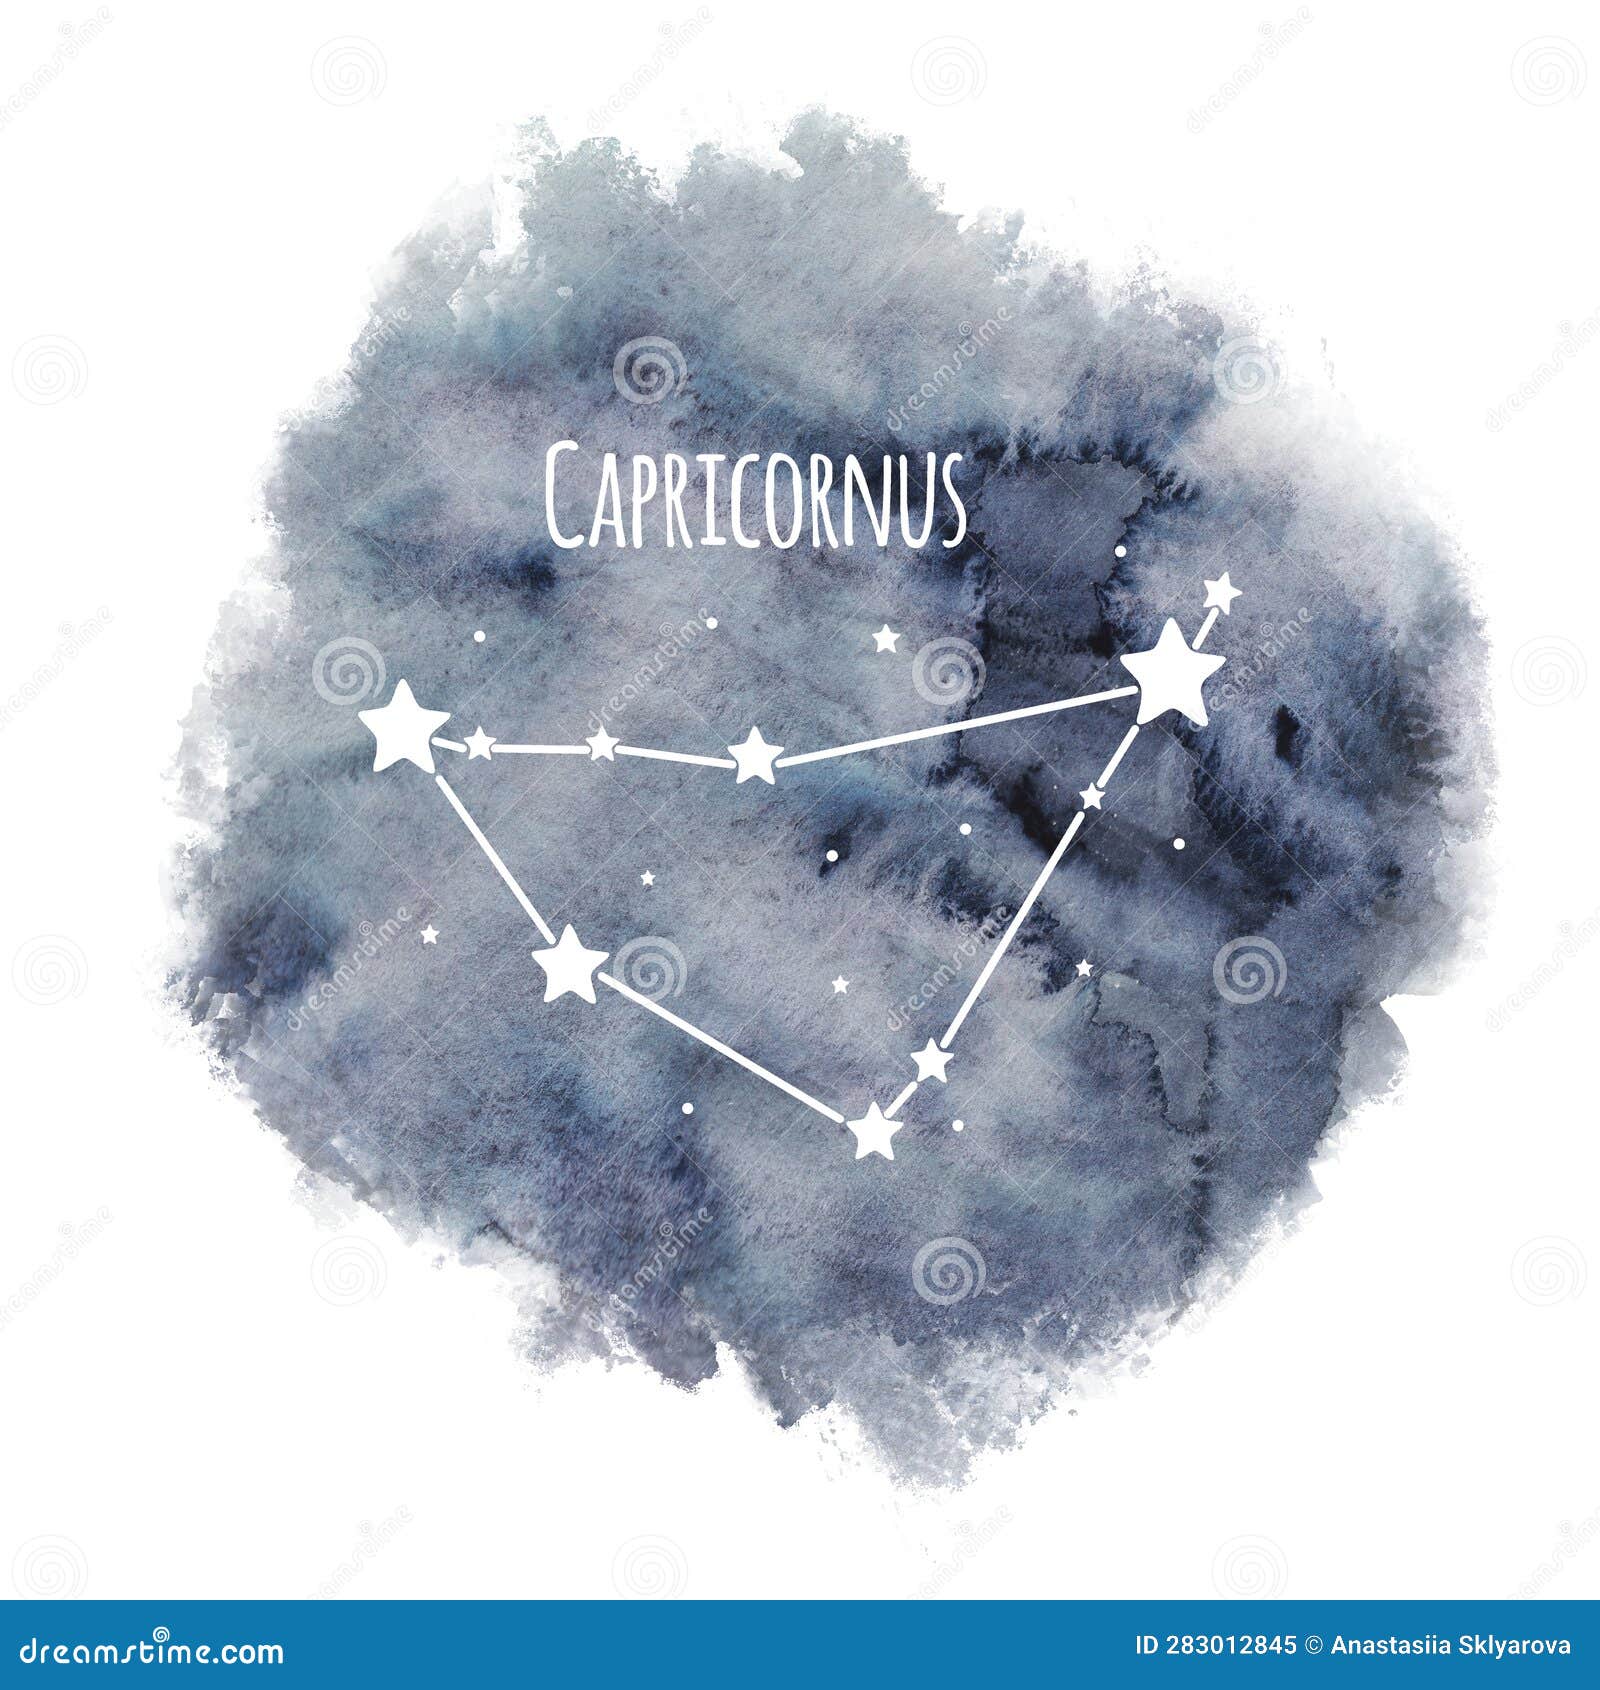 Capricornus Zodiac Sign Constellation on Watercolor Background Isolated ...